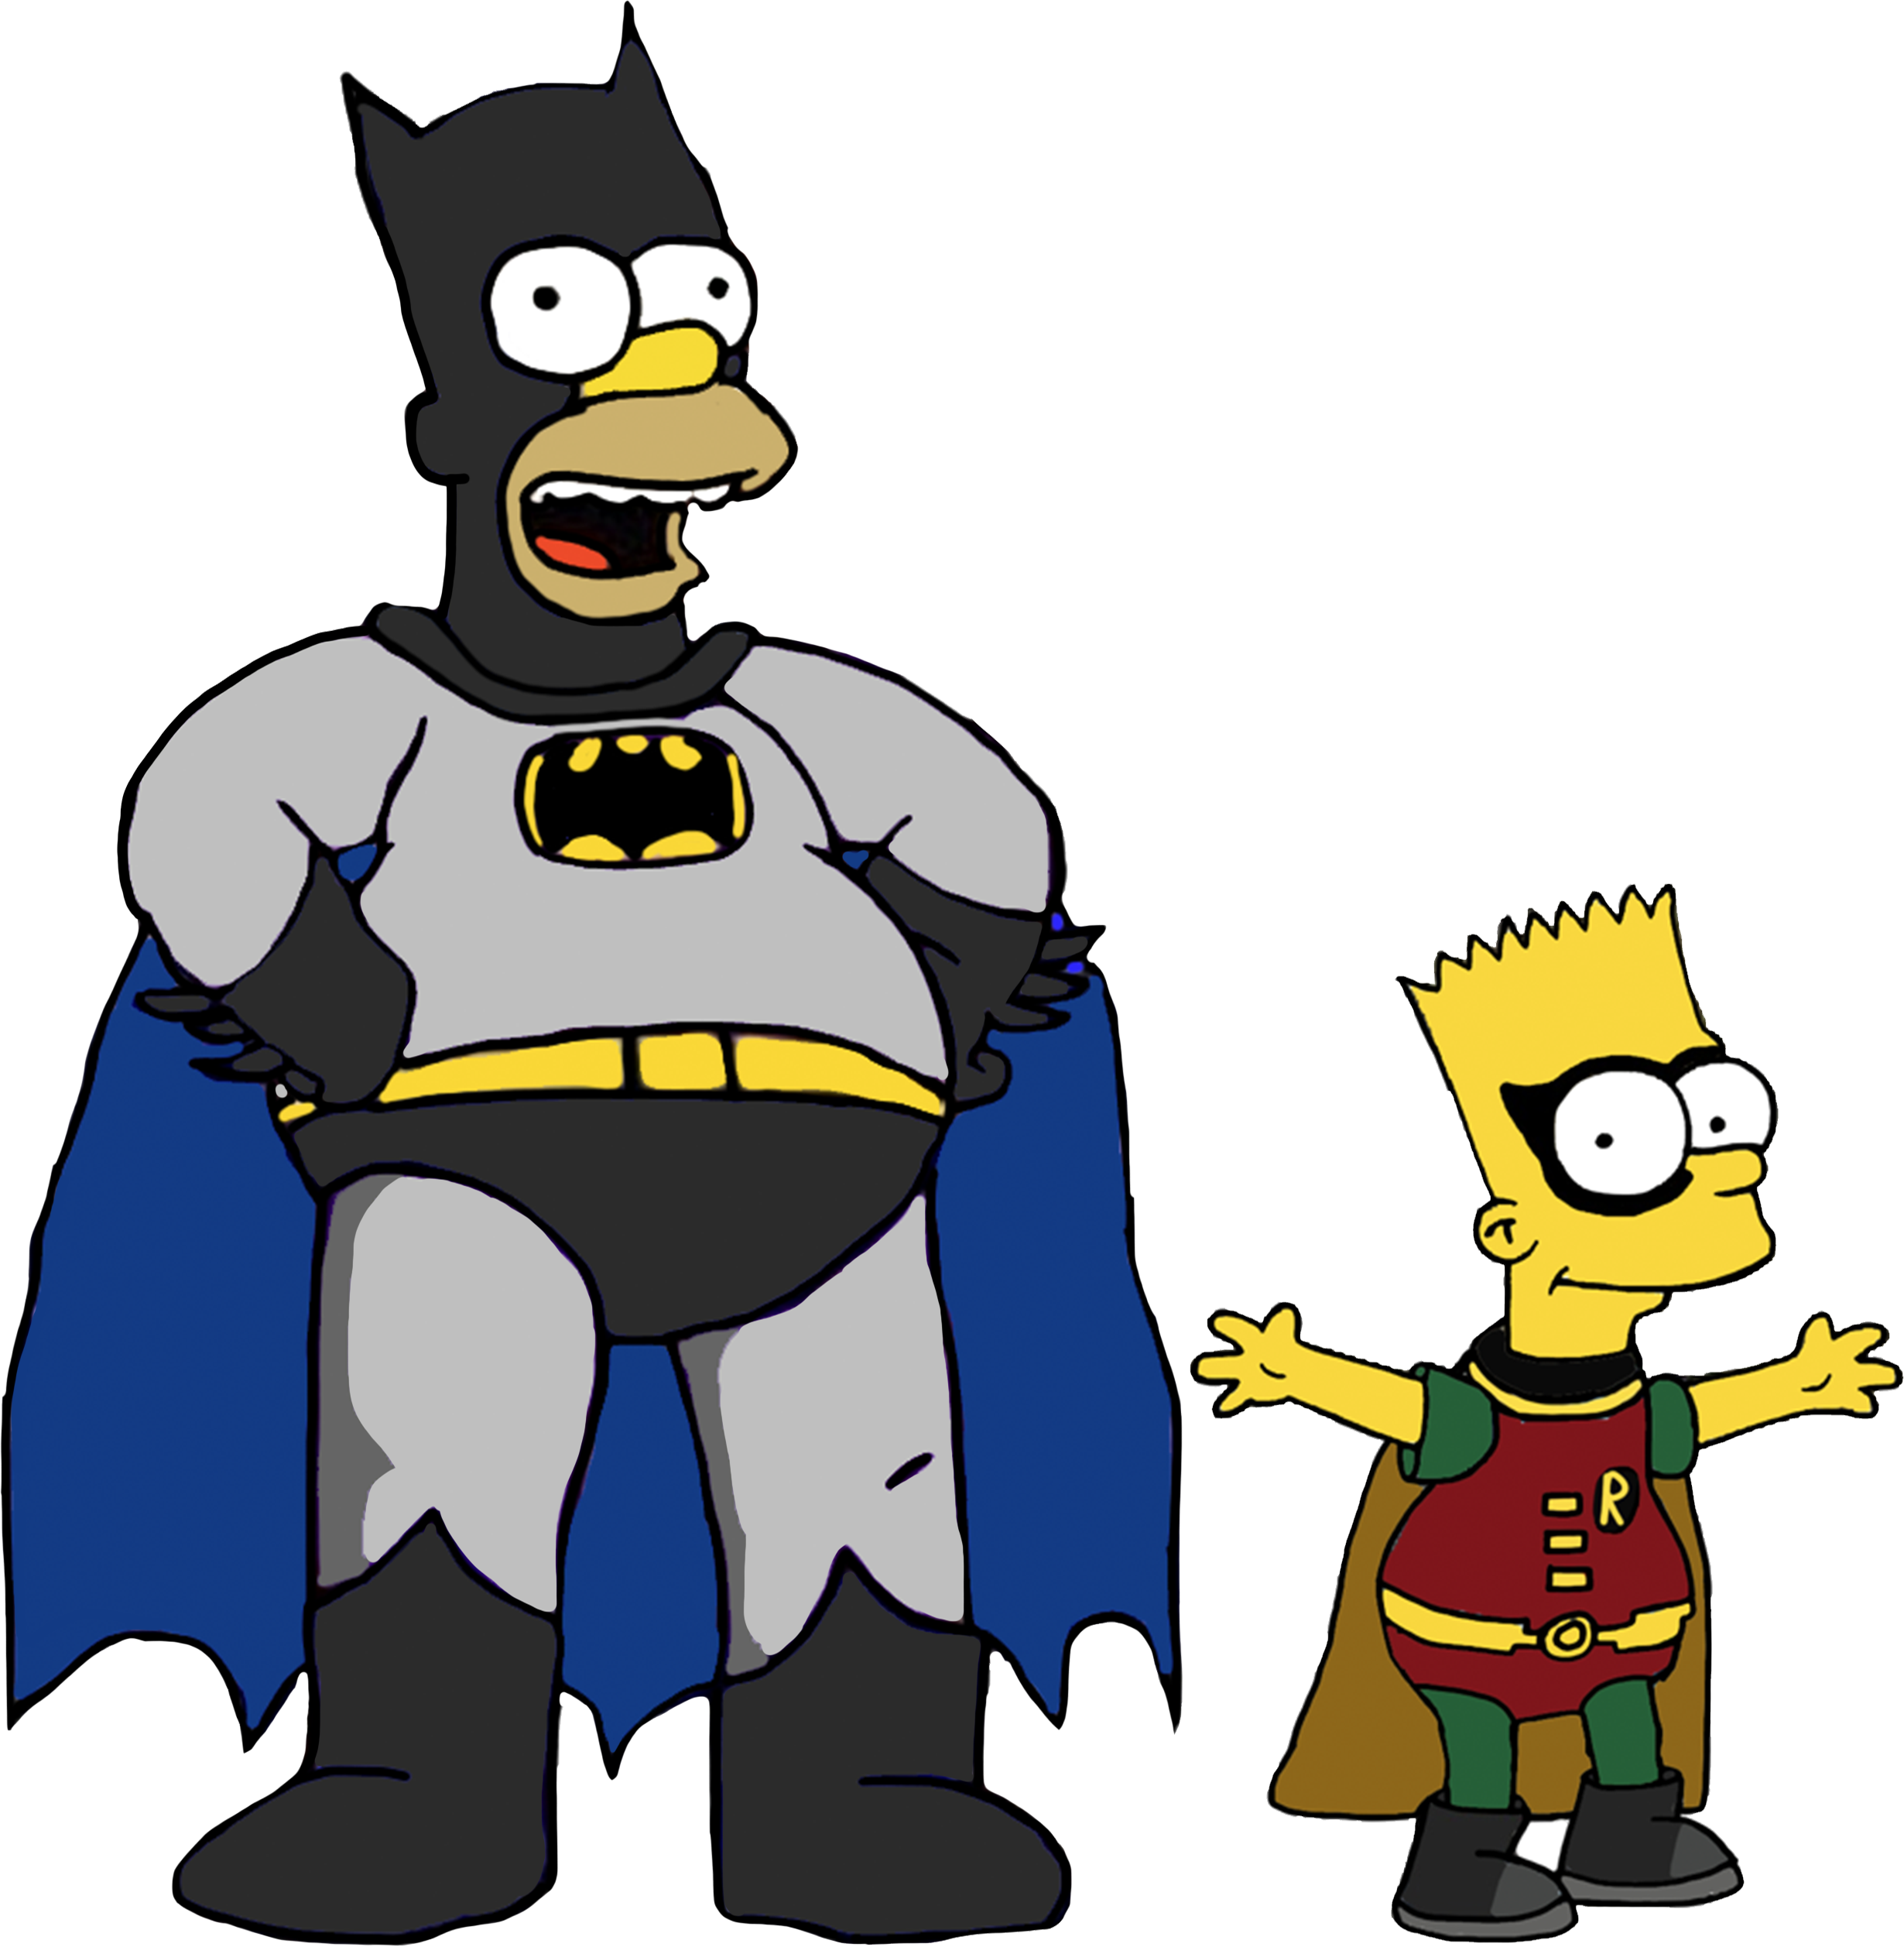 Homer and Bart as Batman and Robin by HomerSimpson1983 on DeviantArt